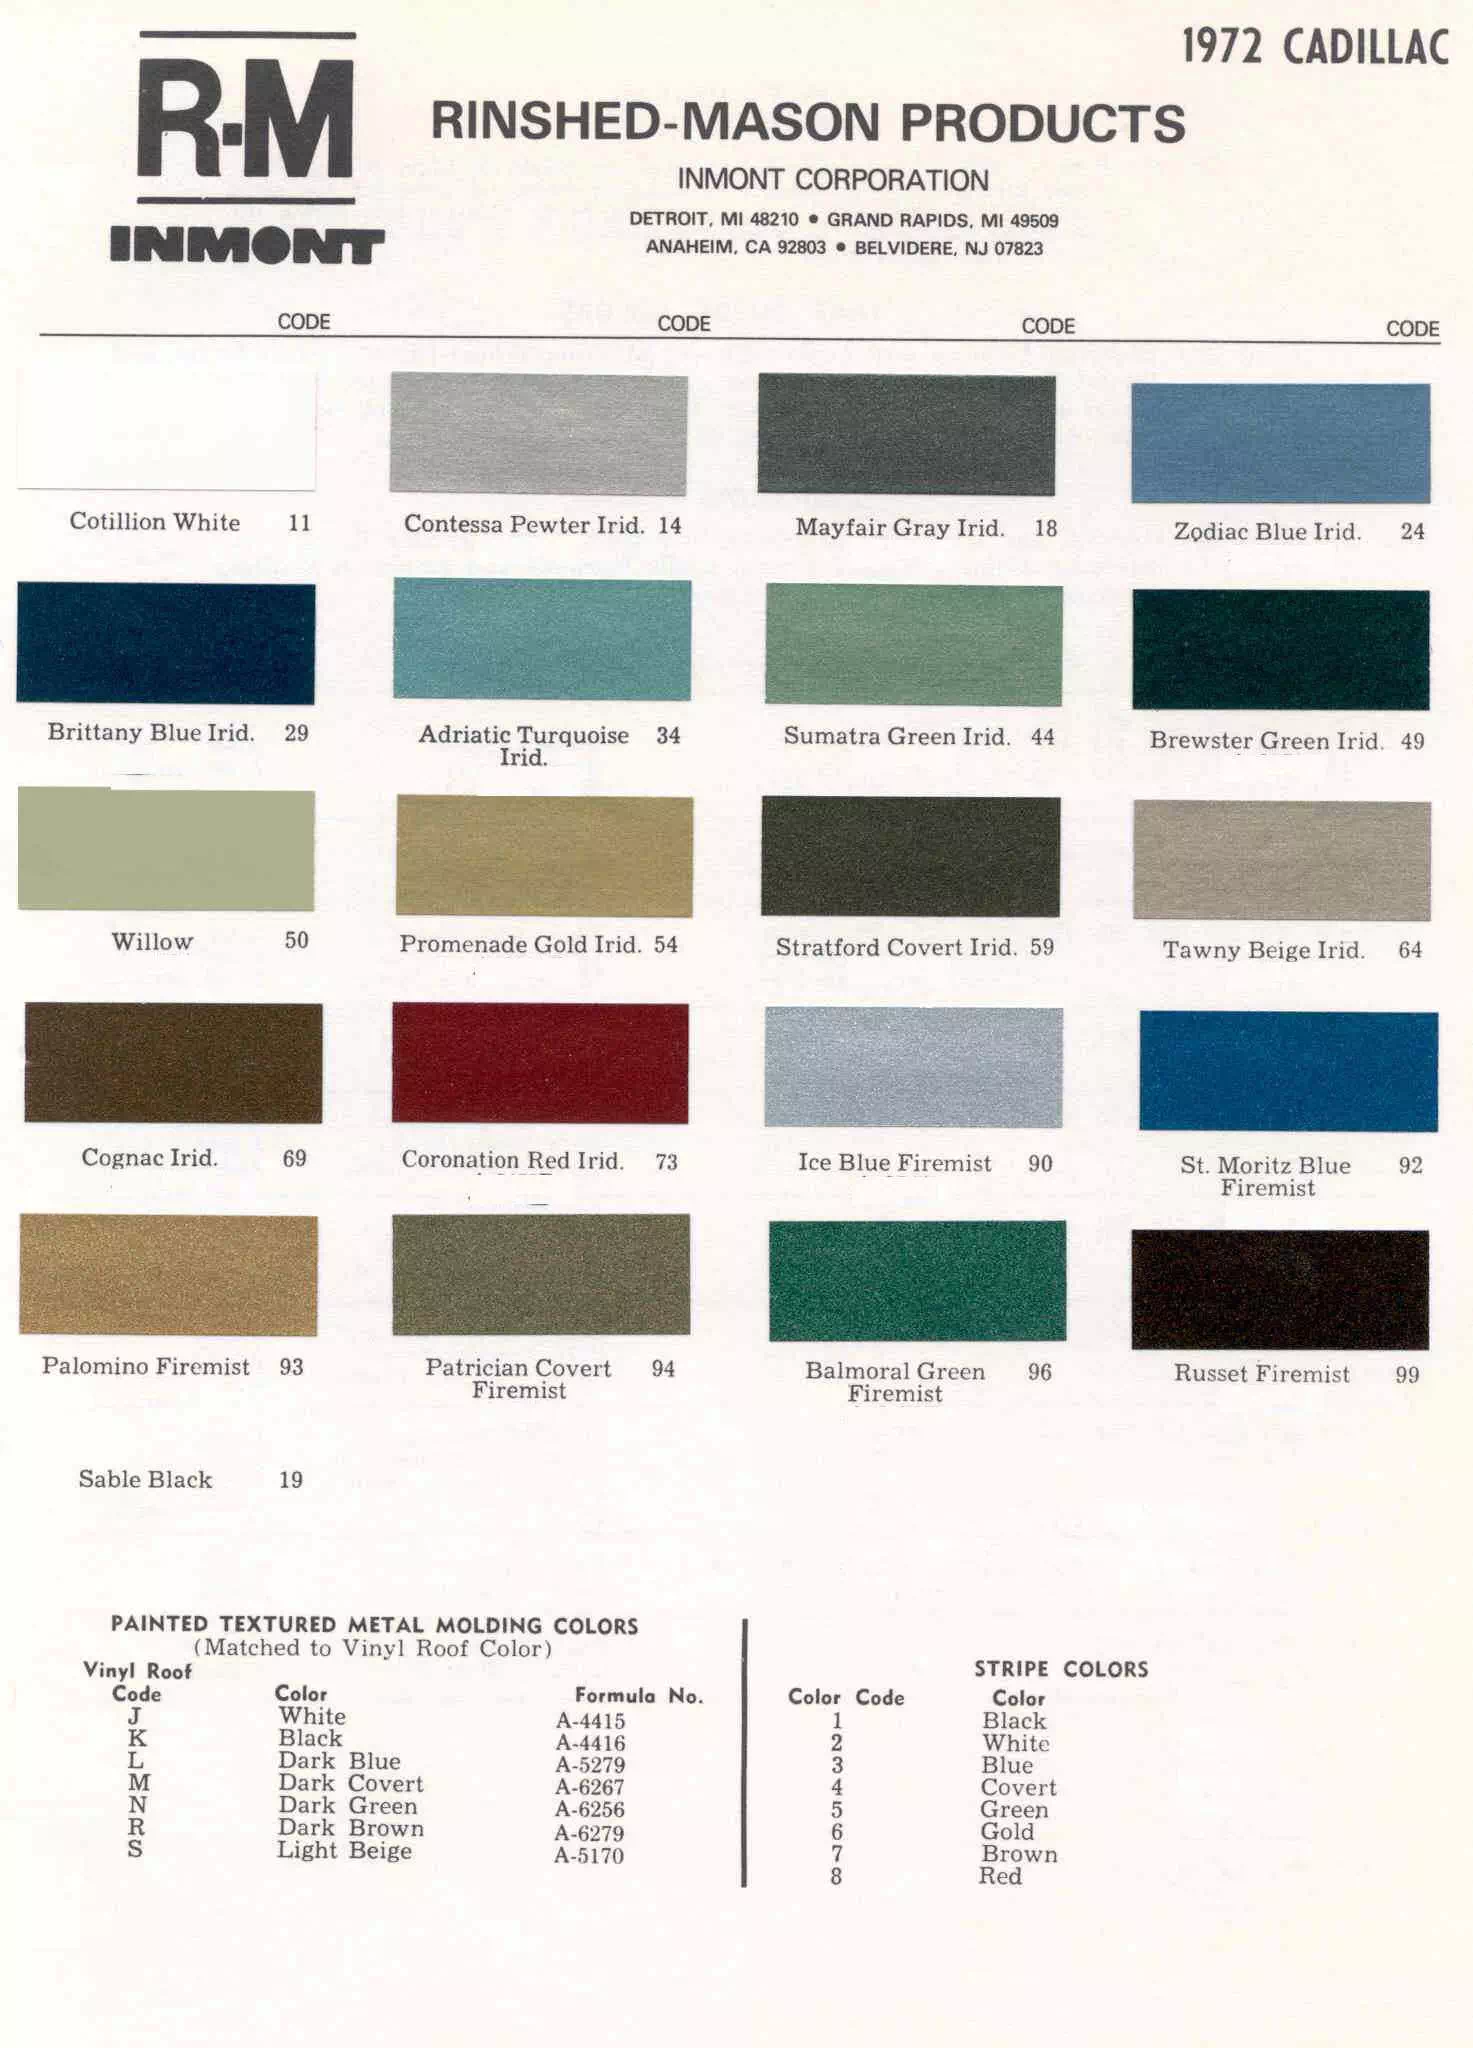 Color Codes and Color Swatch Examples of the Oem Paint from 1972